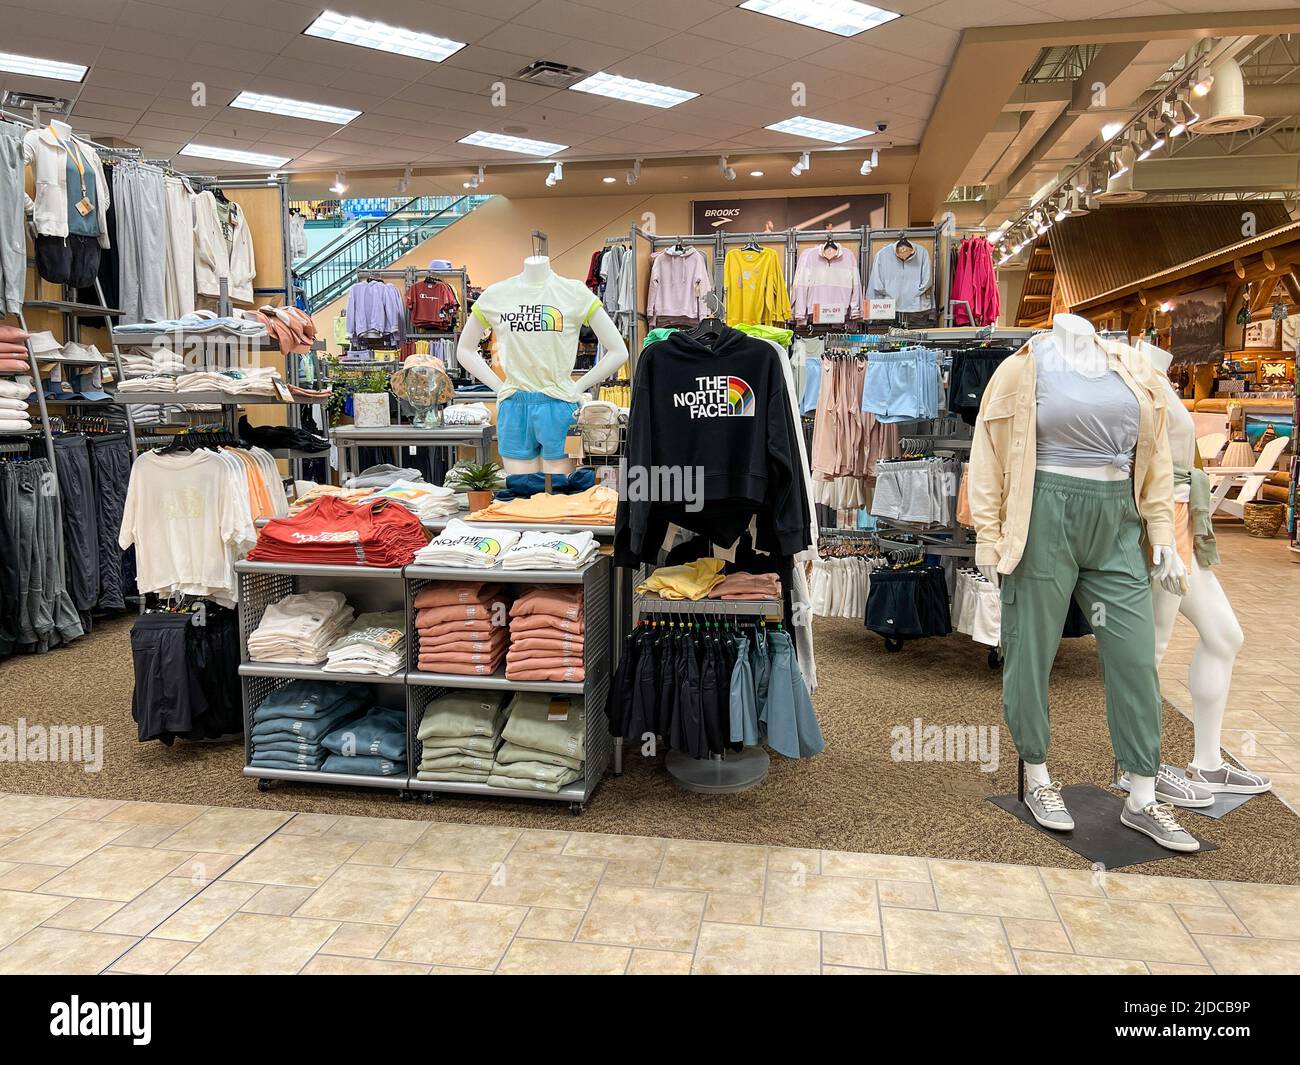 Springfield, IL USA - May 2, 2022: A display of Womens North Face